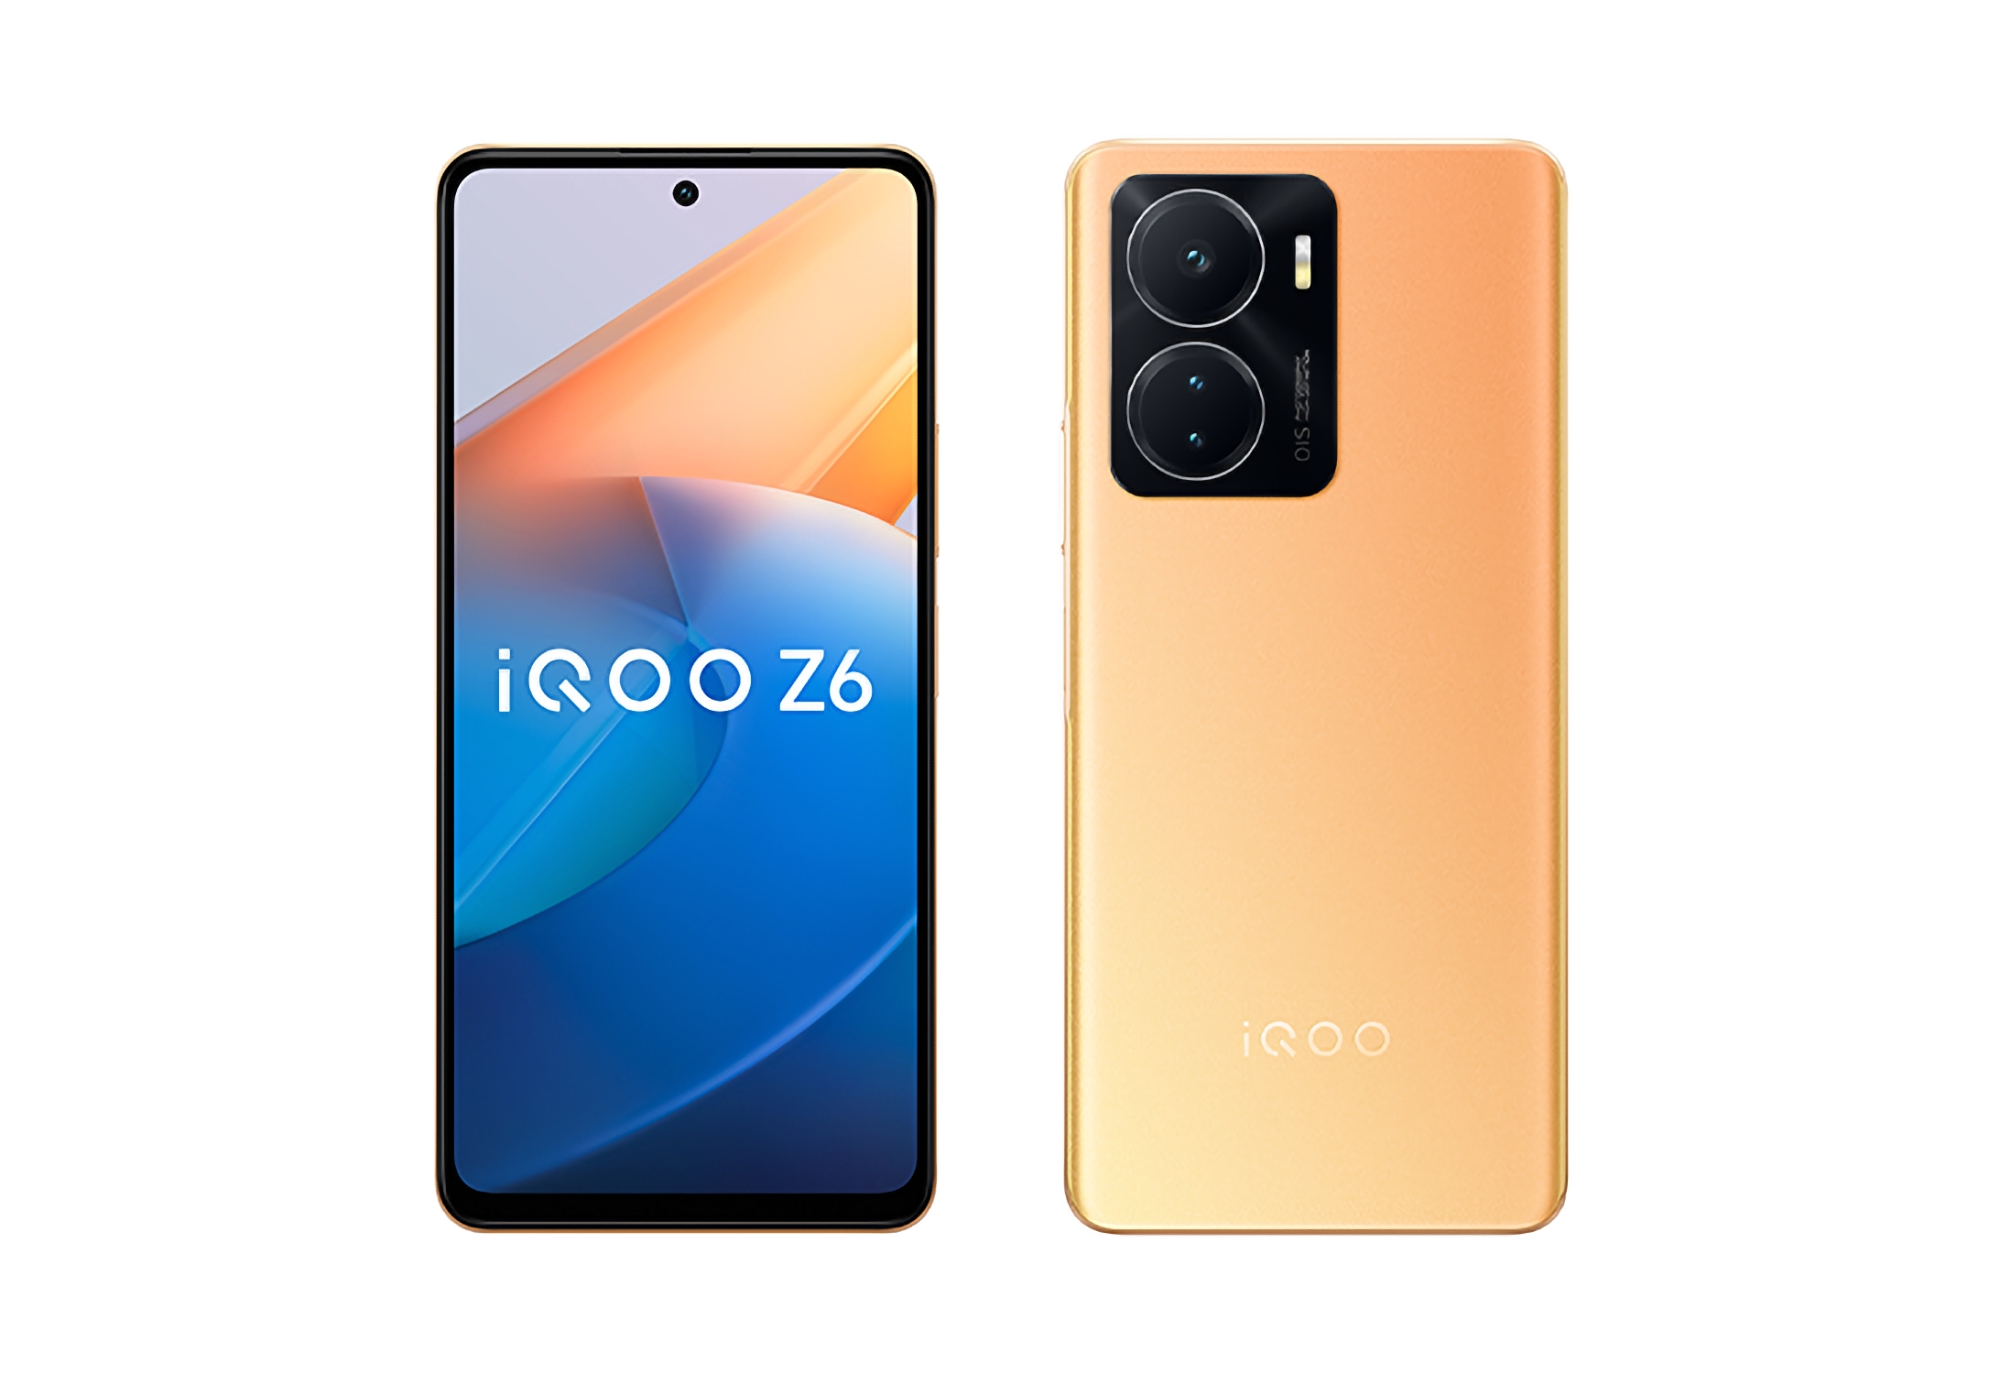 Confirmed: iQOO Z6 will get Snapdragon 778G+ chip, LPDDR5 RAM and UFS 3.1 storage